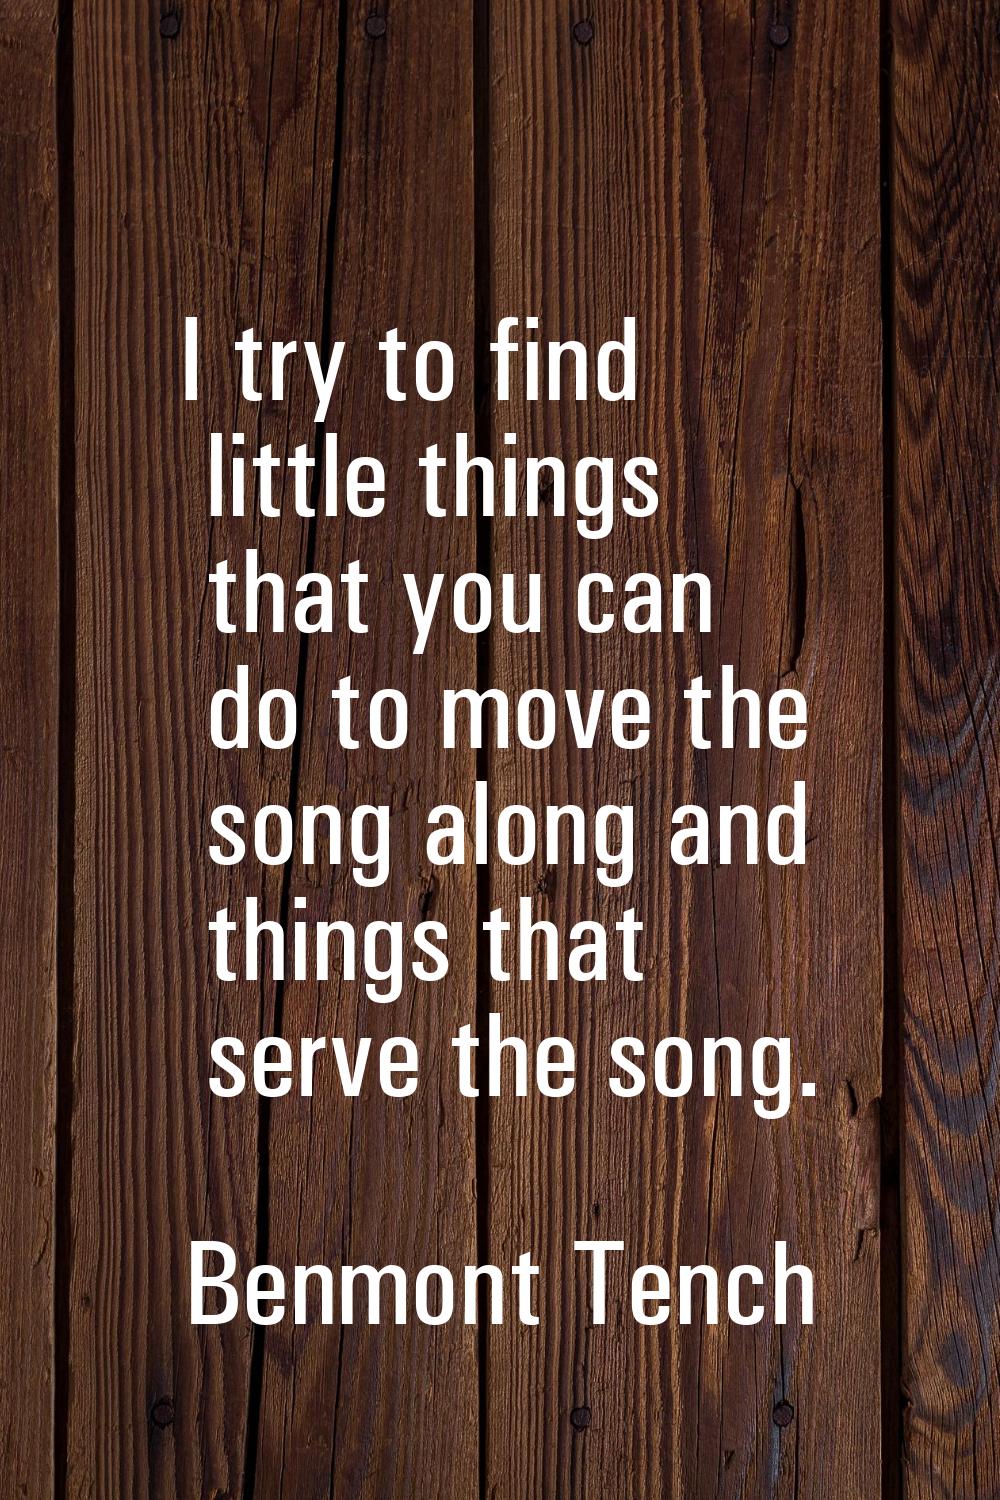 I try to find little things that you can do to move the song along and things that serve the song.